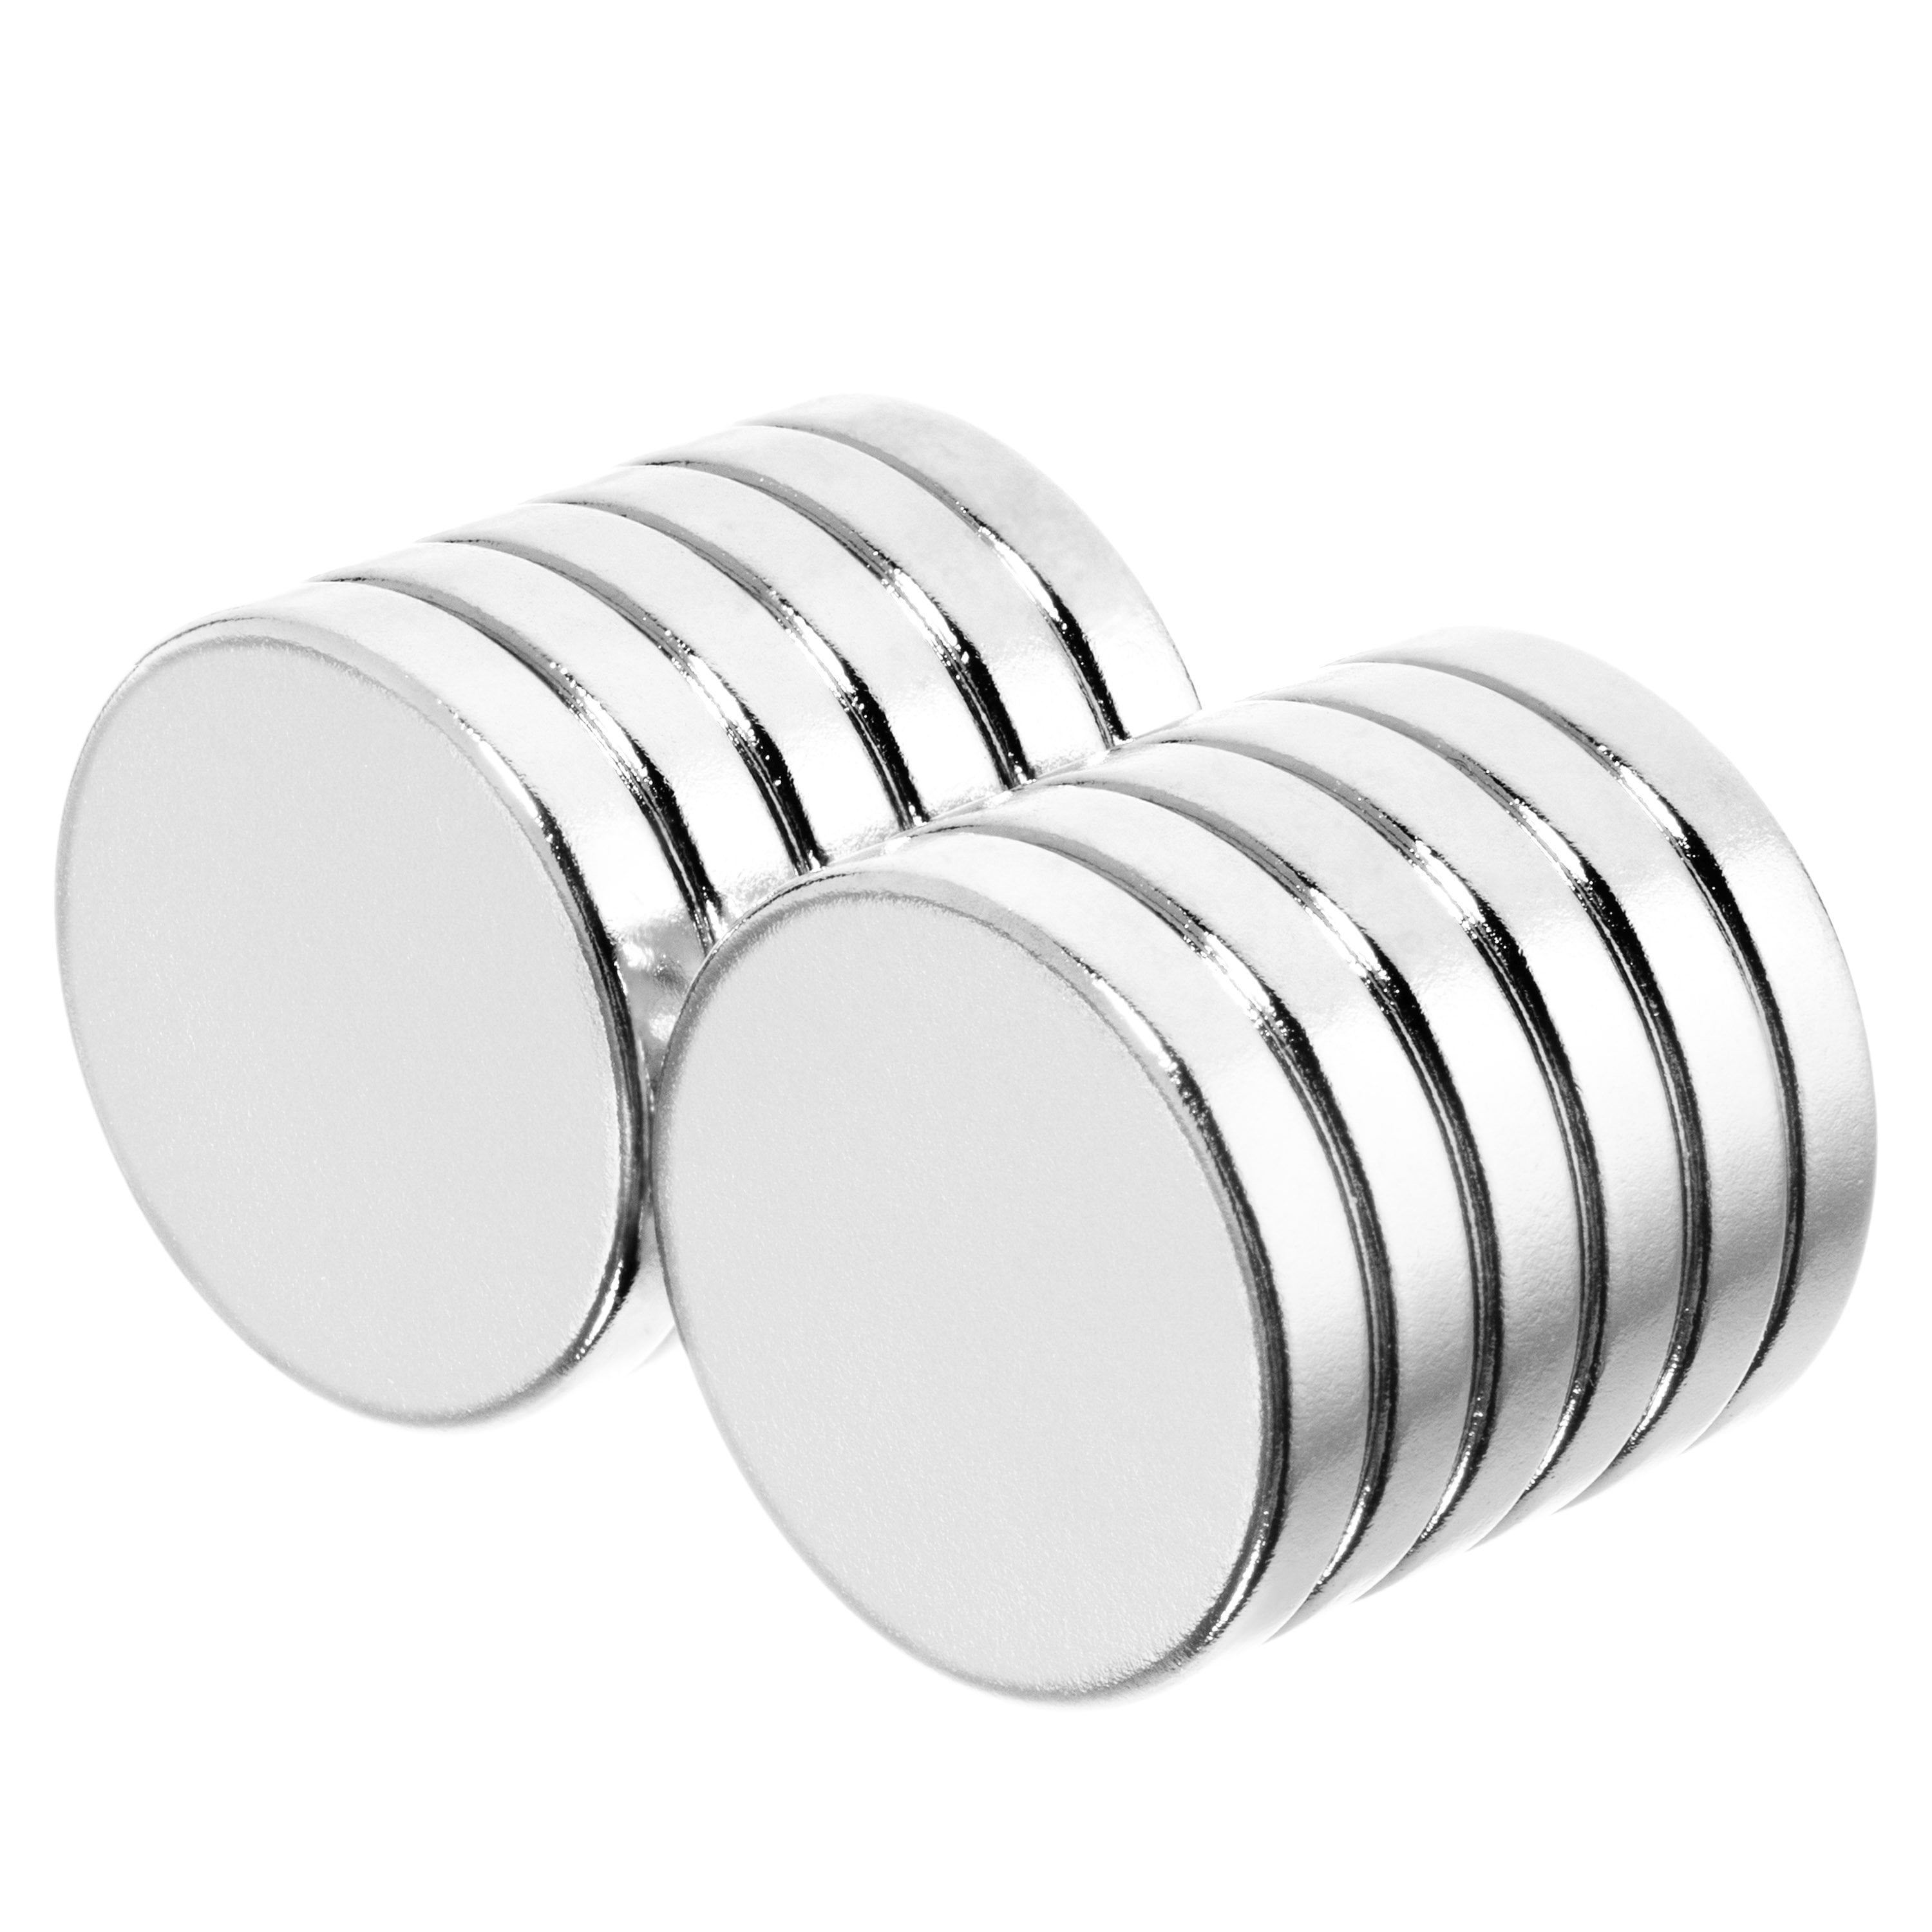 1/2 x 1/16 inch Strong Craft Neodymium Rare Earth Disc Magnets N48 100 Pack 